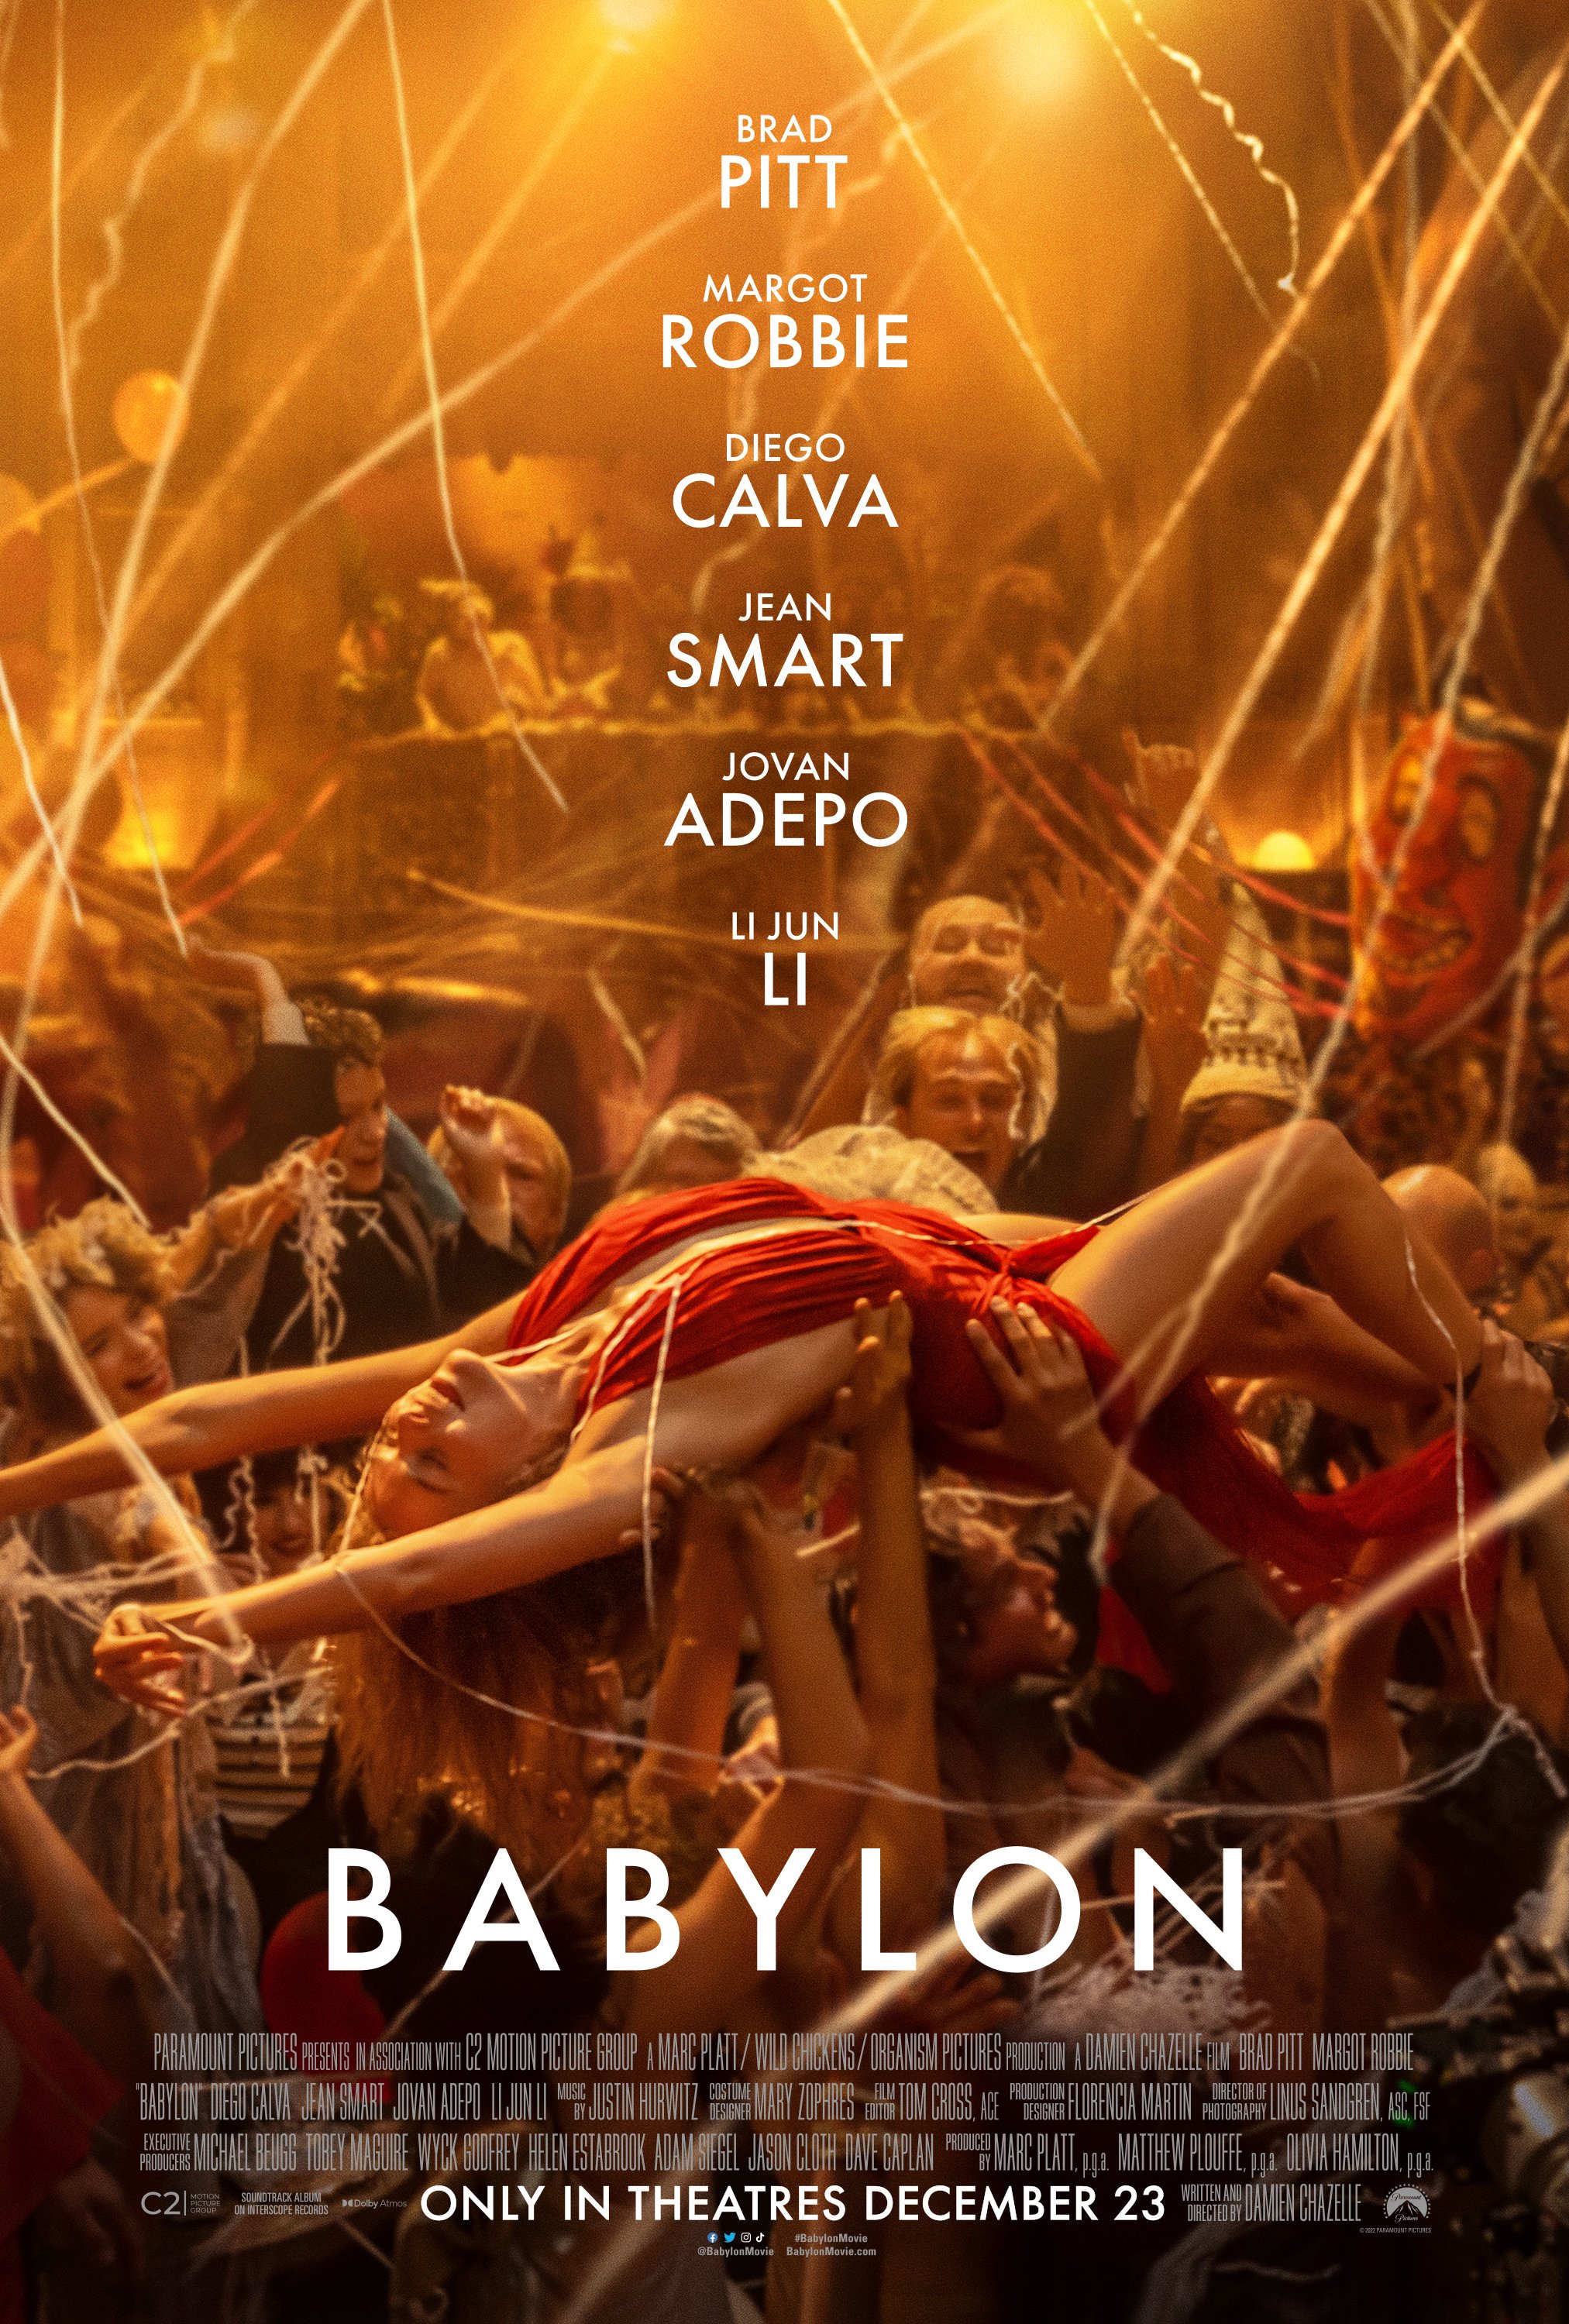 Babylon images © Paramount Pictures